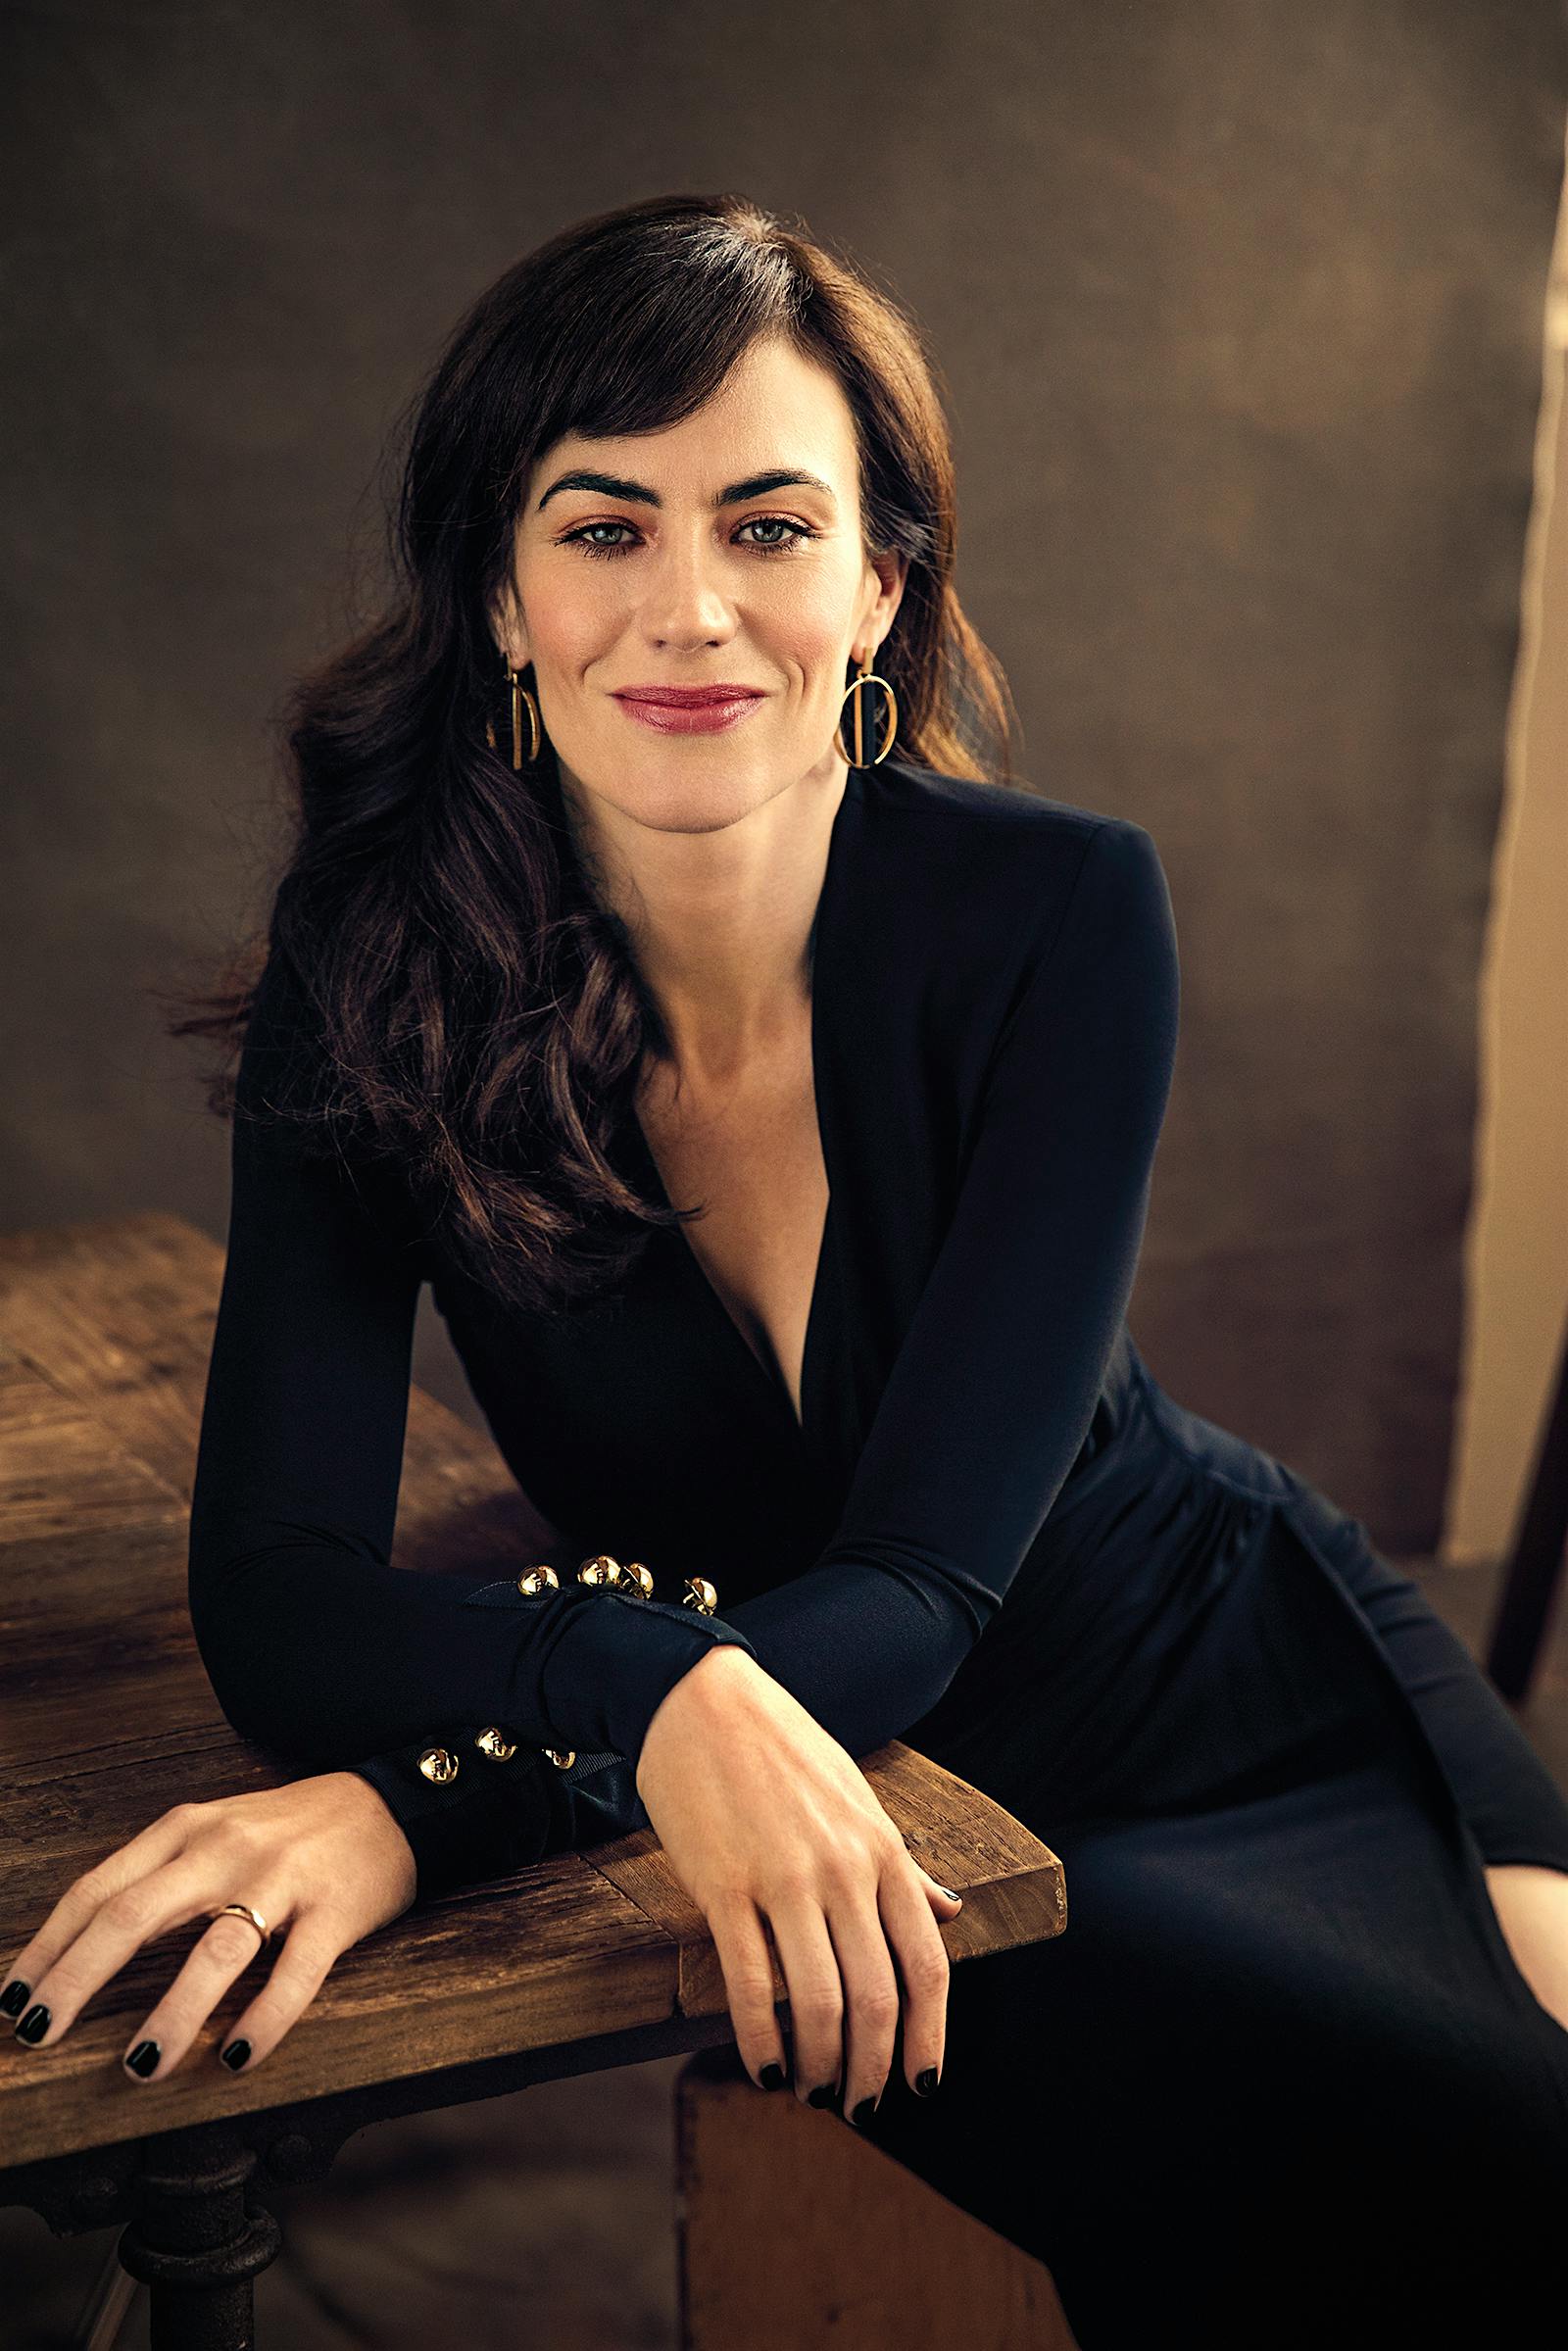 bill weitzel share maggie siff sexy pictures photos